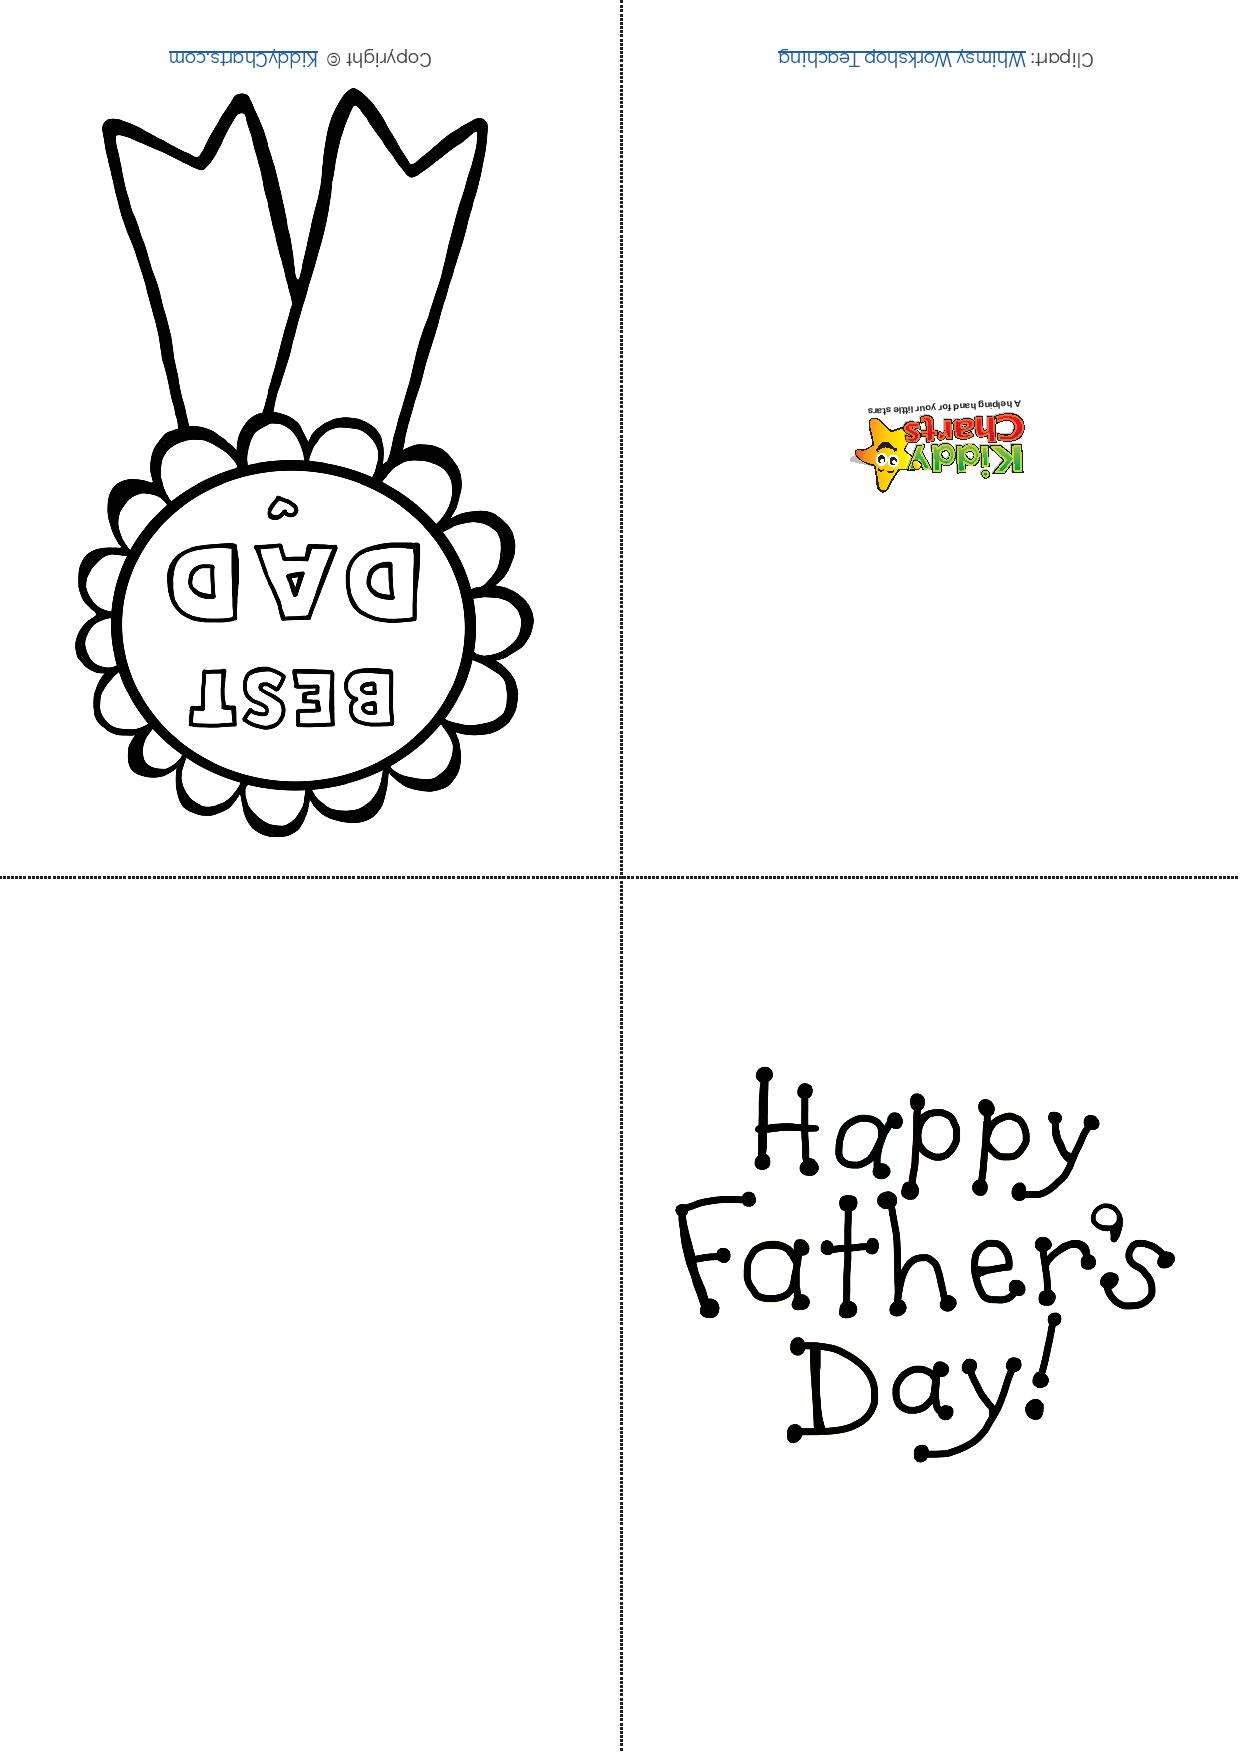 A father is being celebrated with a "Happy Father's Day" chart created by KiddyCharts.com.